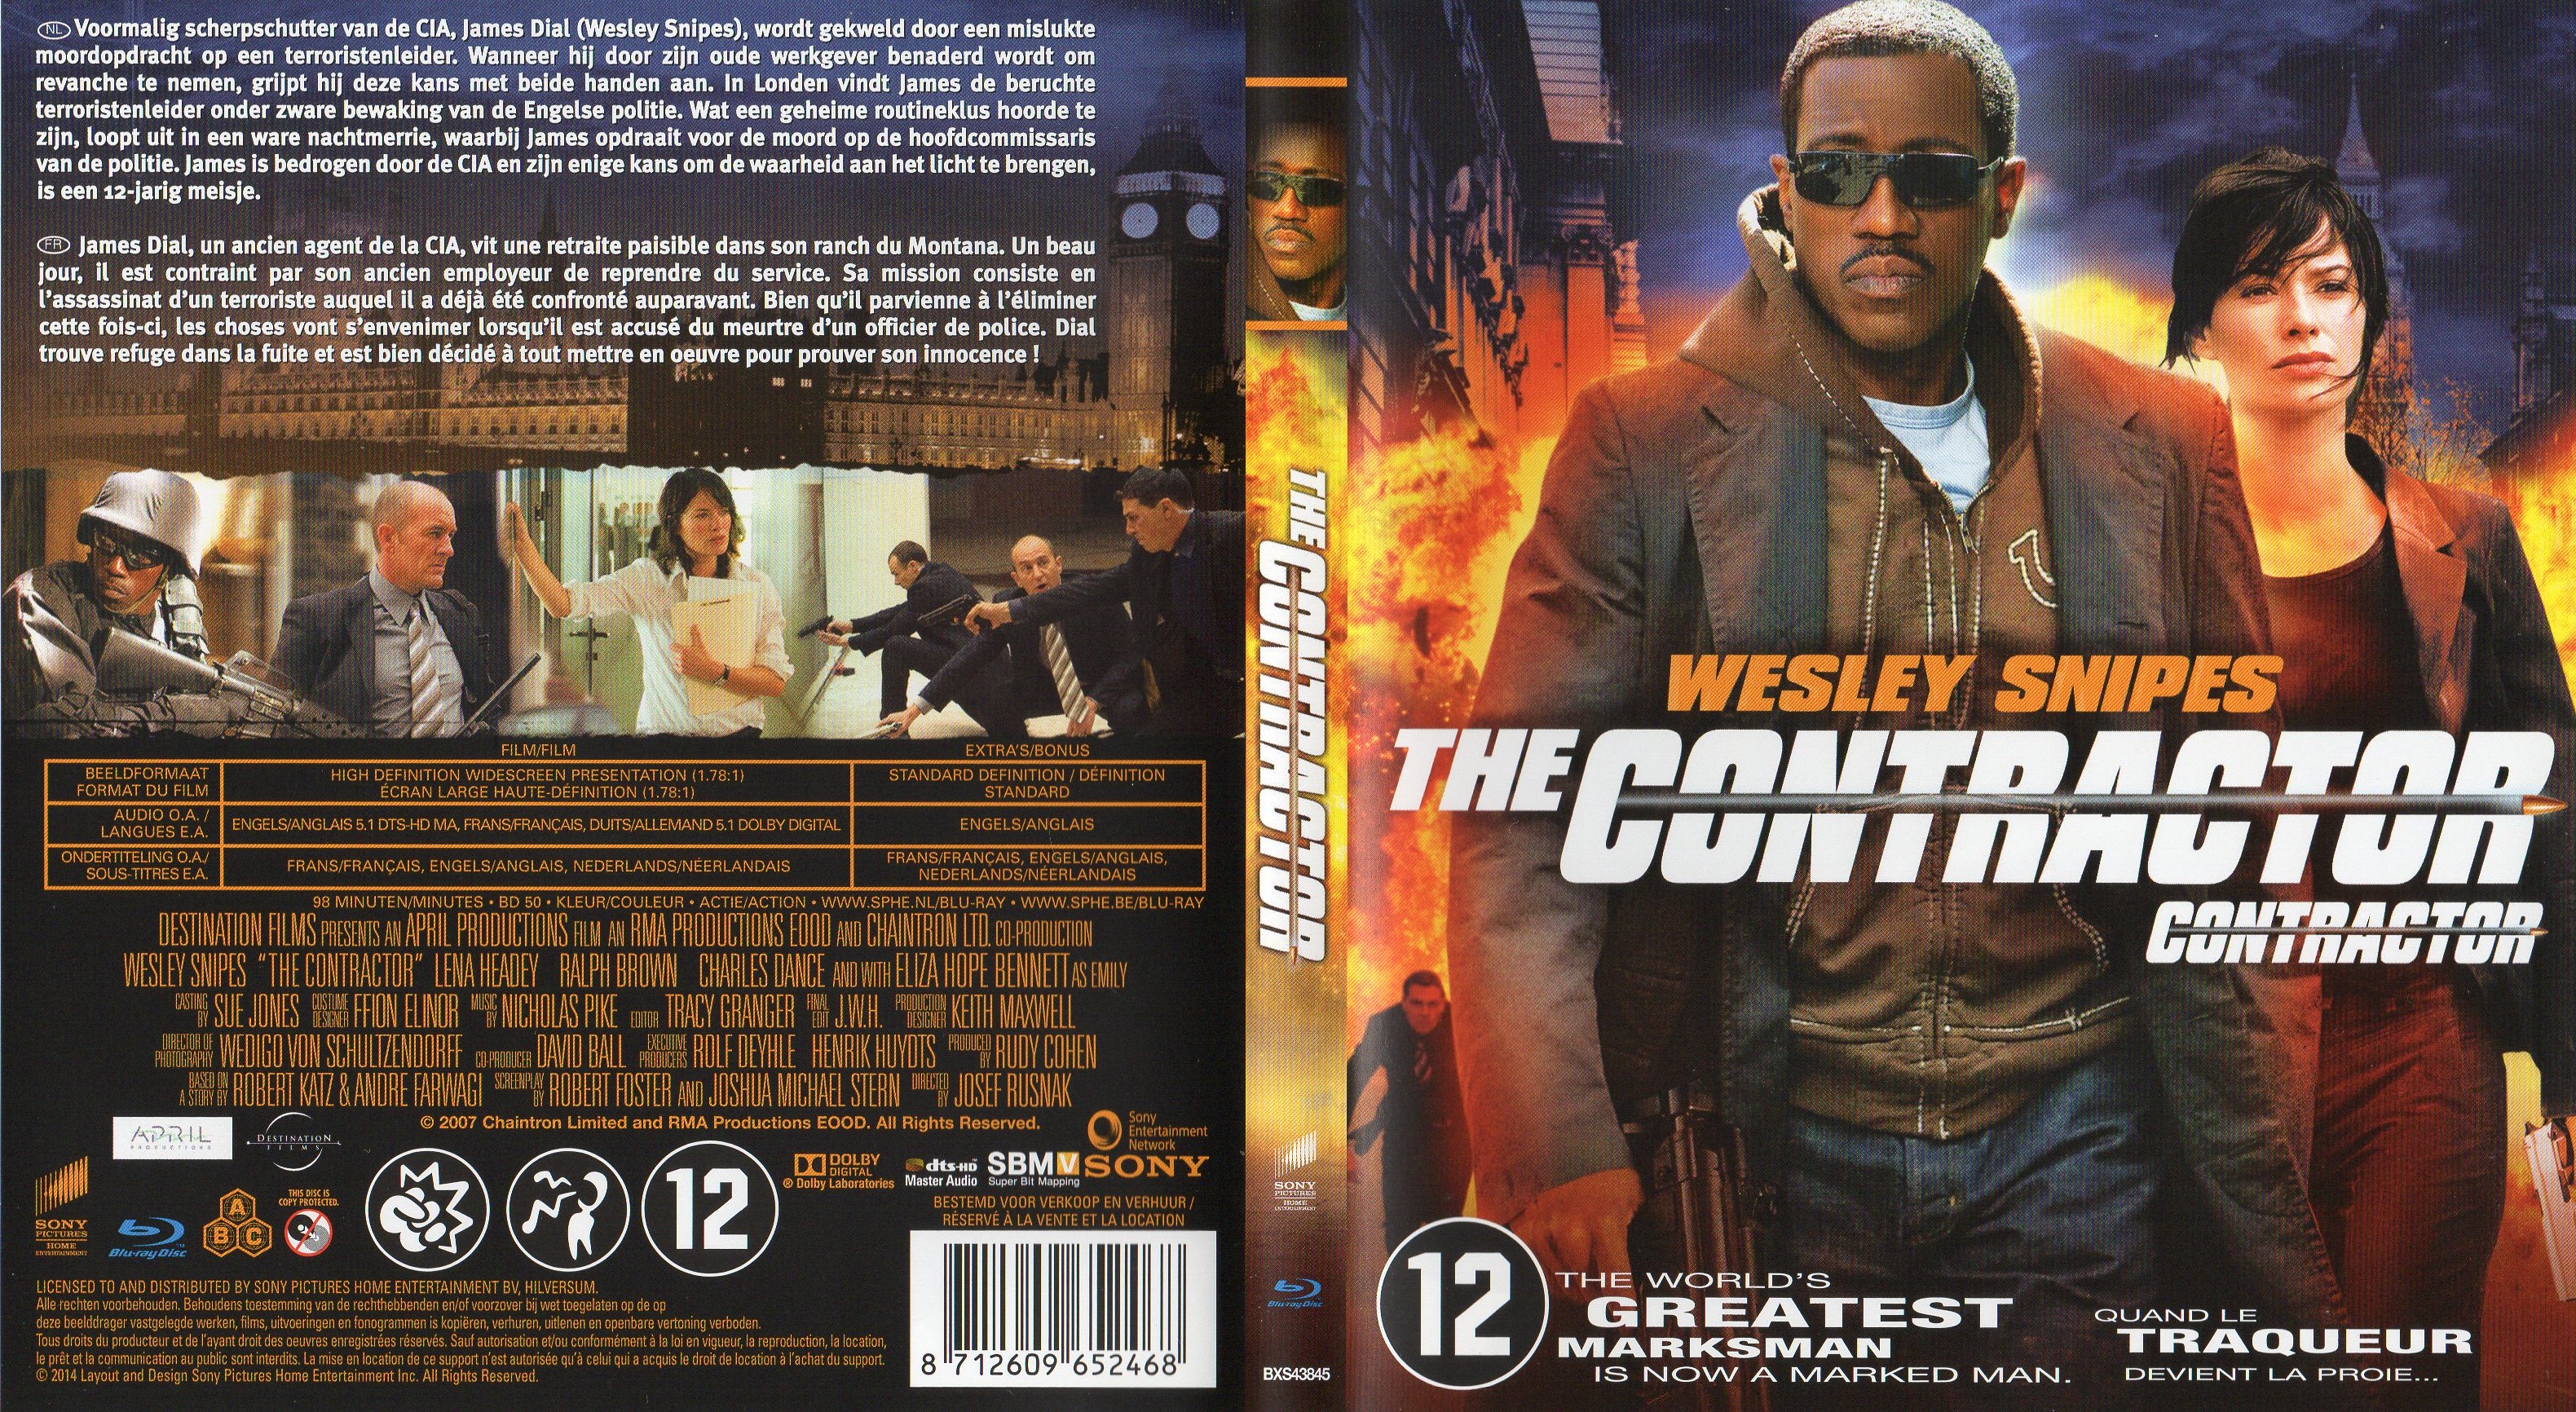 Jaquette DVD The contractor (BLU-RAY)